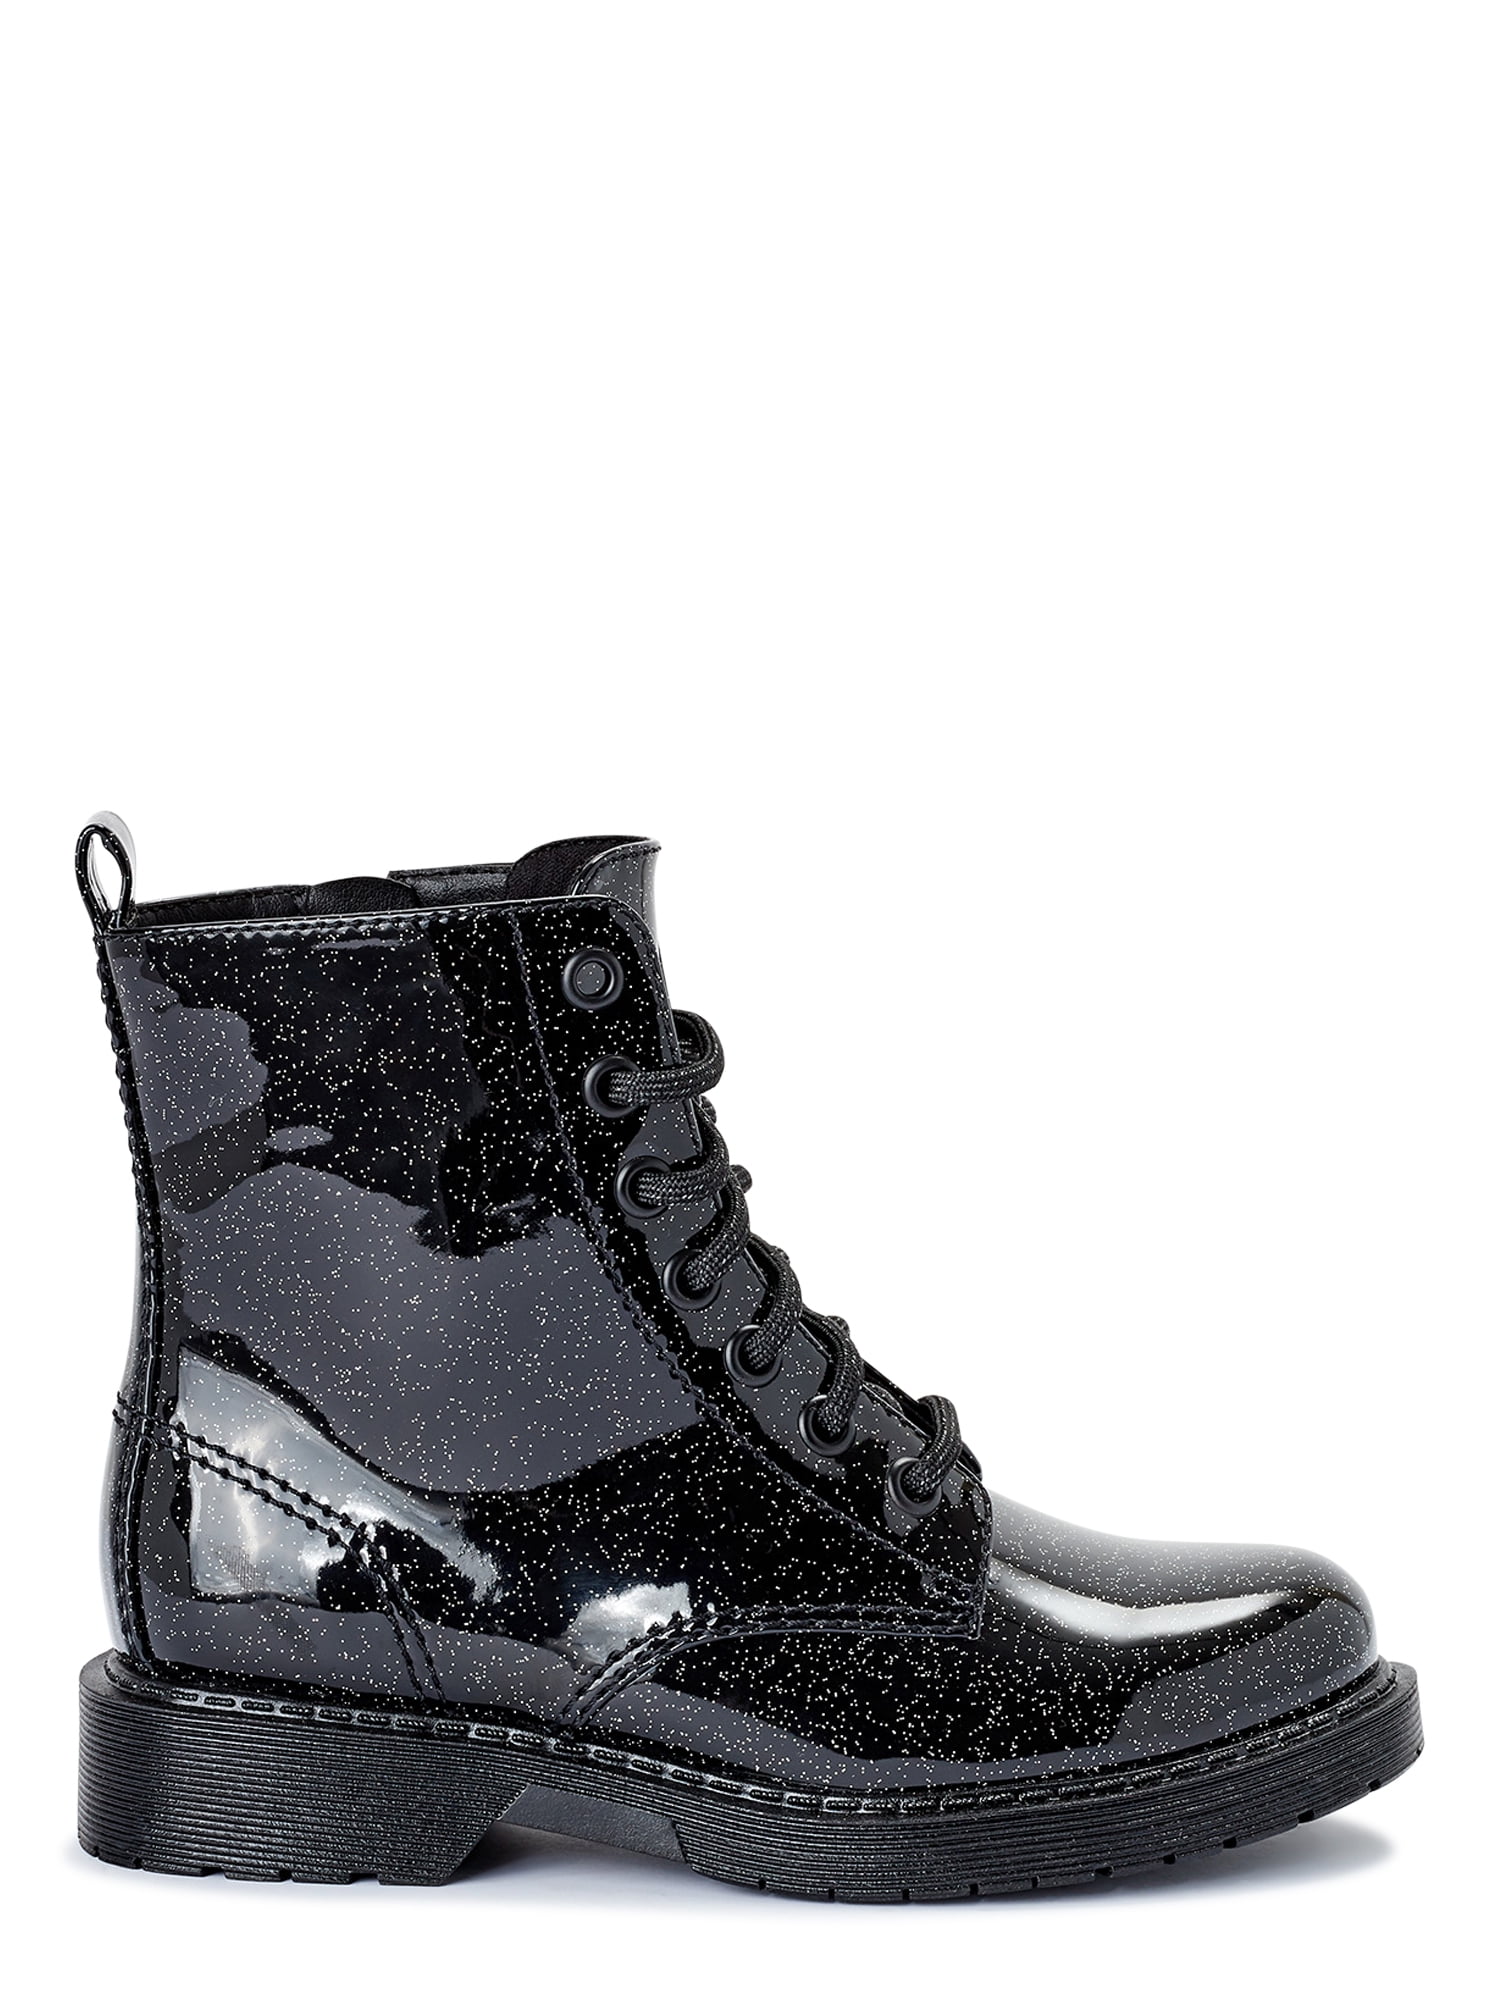 Kids Girls Black Shiny Children's Sequinned Lace Up Smart Party Dressy Boots 